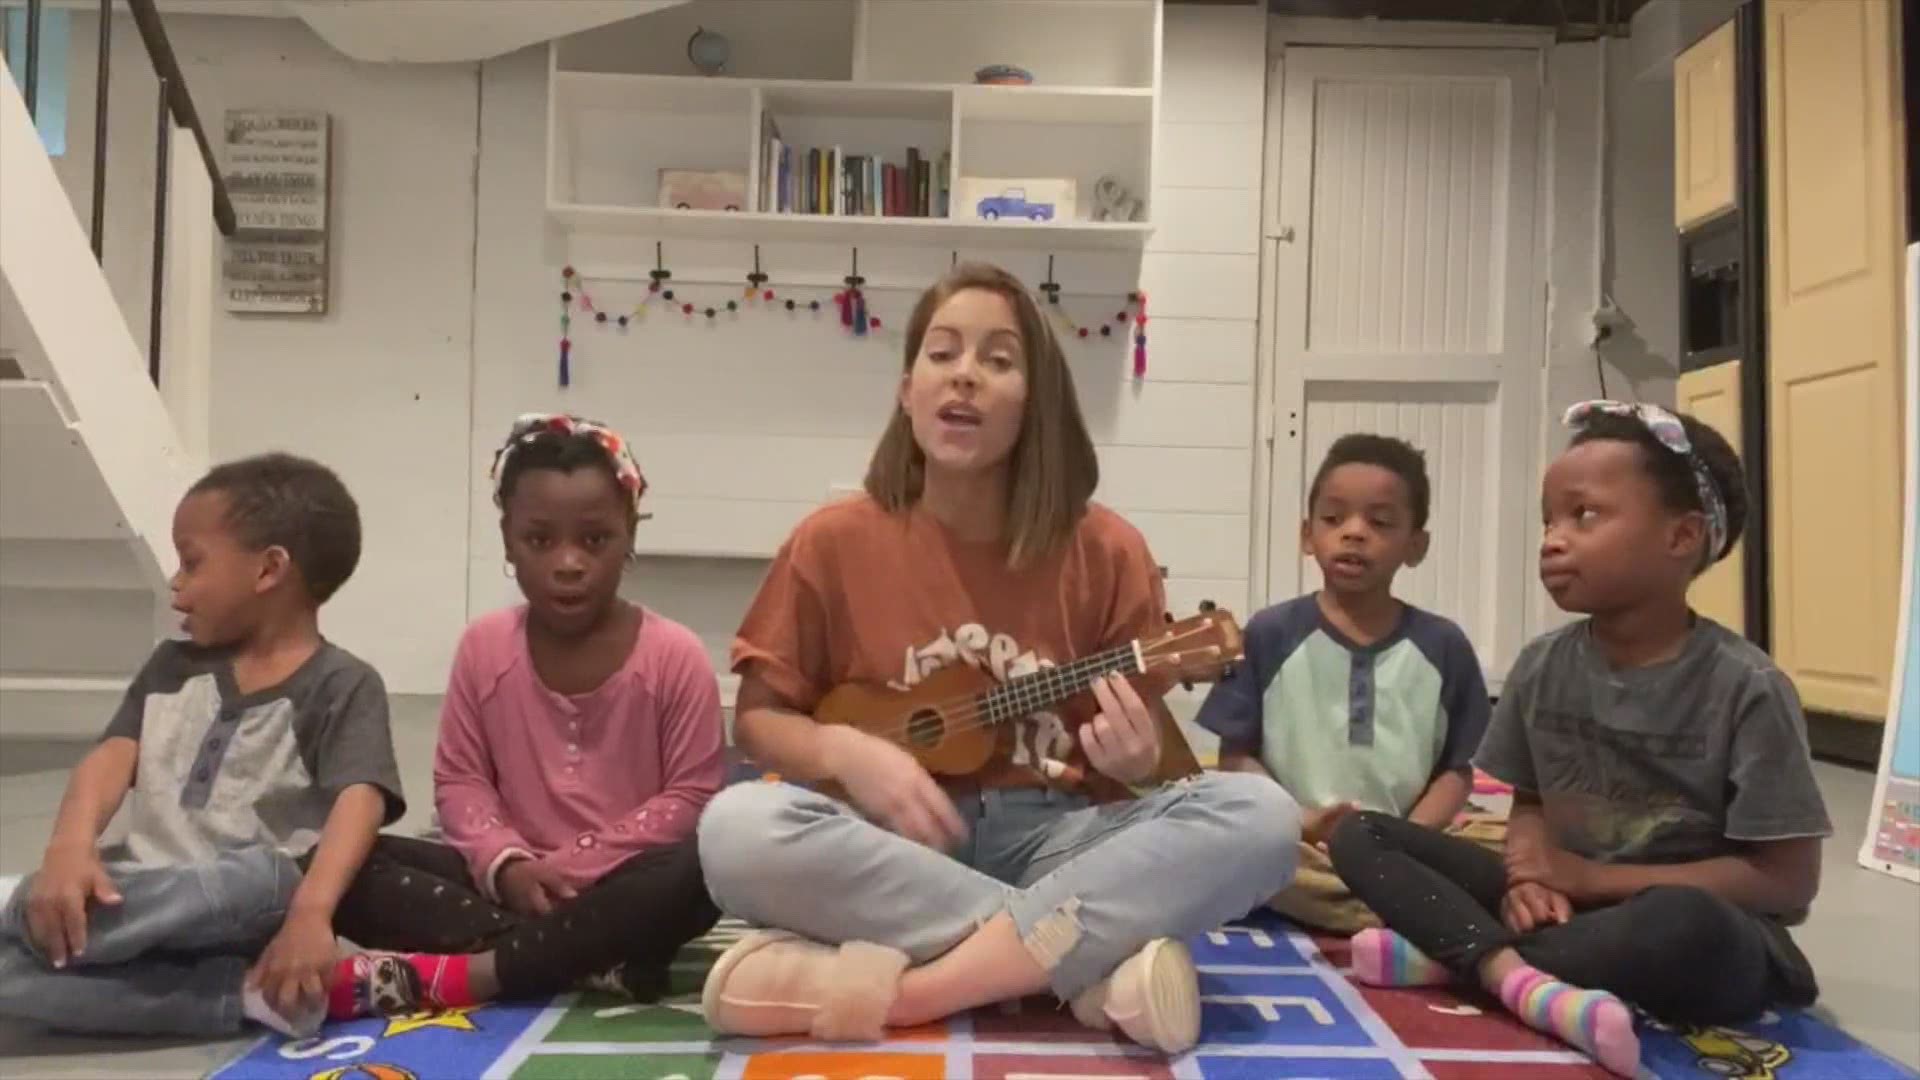 This mom of four is using music and humor to keep her kids learning while they are home from school.